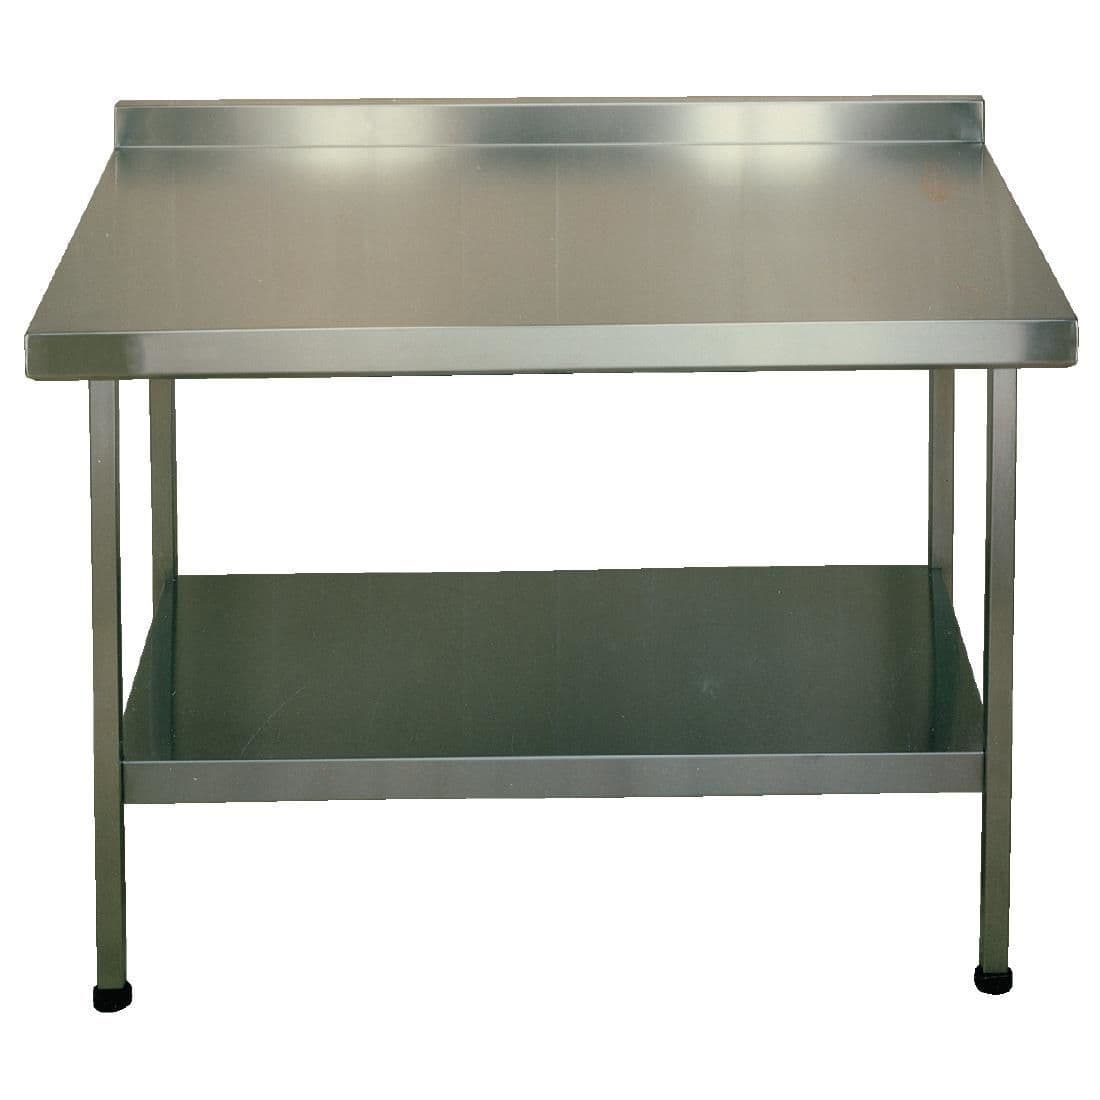 Franke Sissons Stainless Steel Wall Table with Upstand 900x650mm JD Catering Equipment Solutions Ltd